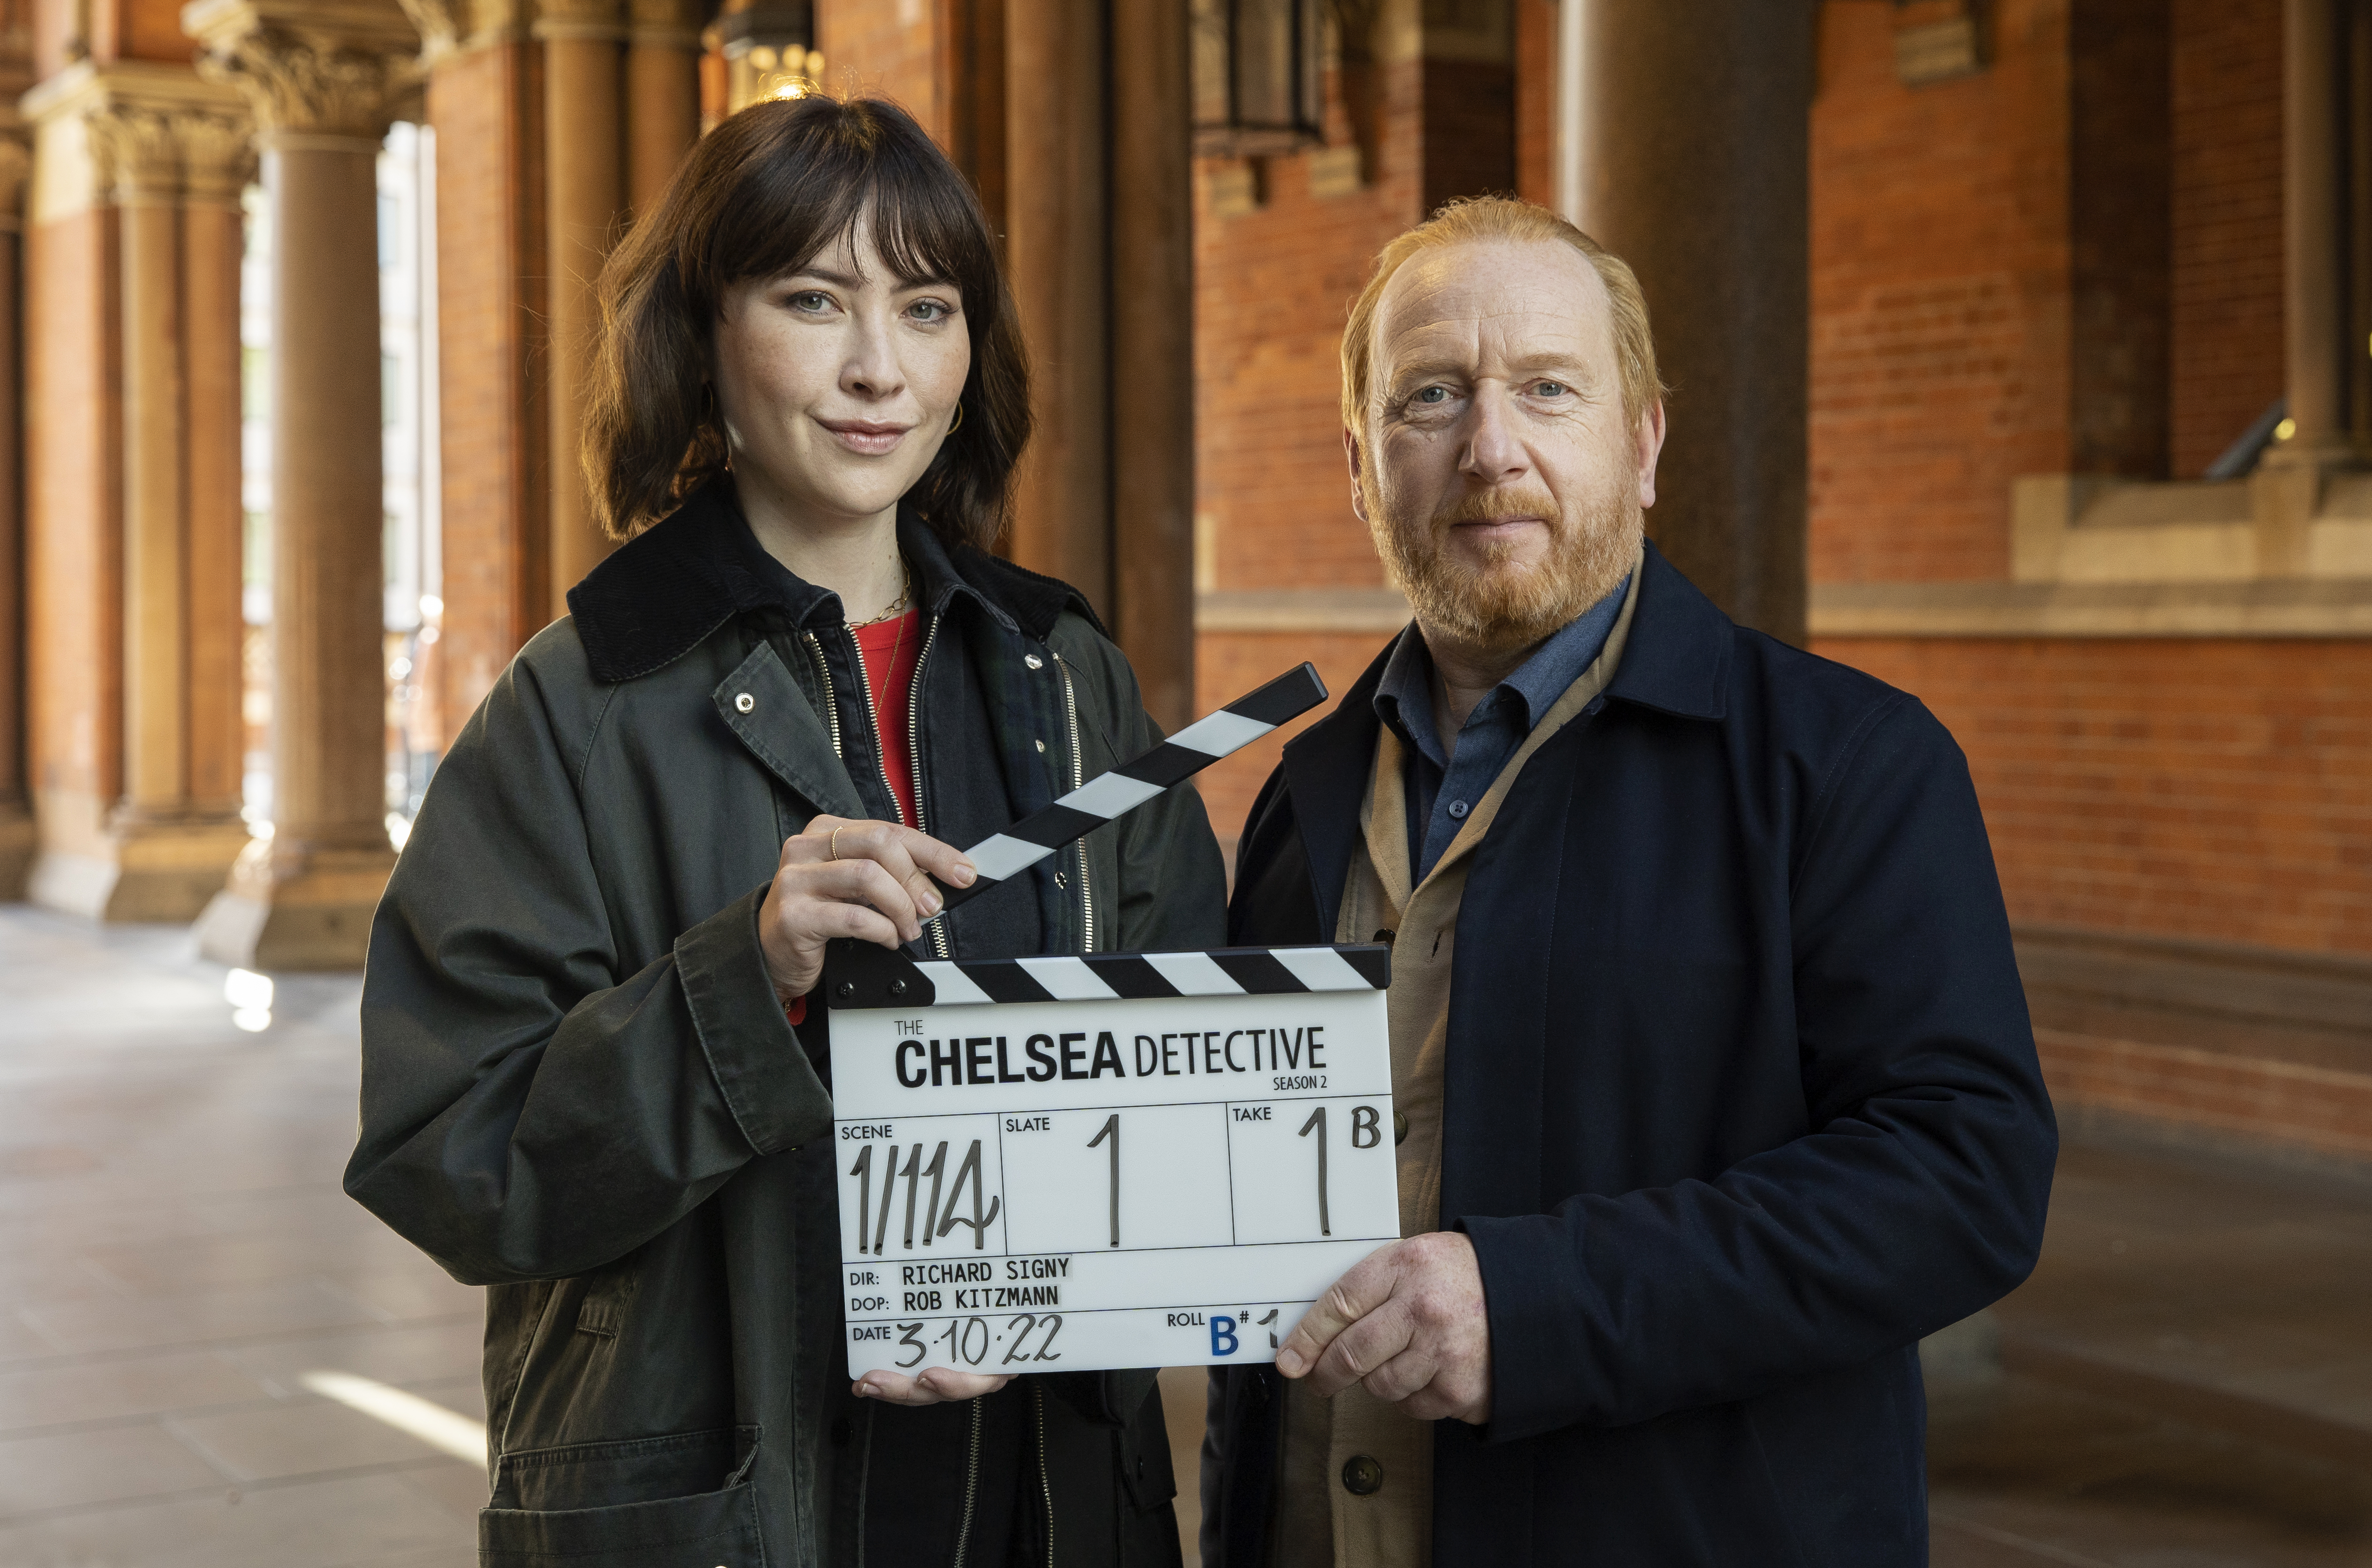 Picture shows: Filming for The Chelsea Detective Season 2 begins, with Adrian Scarborough and Vanessa Emme on set.